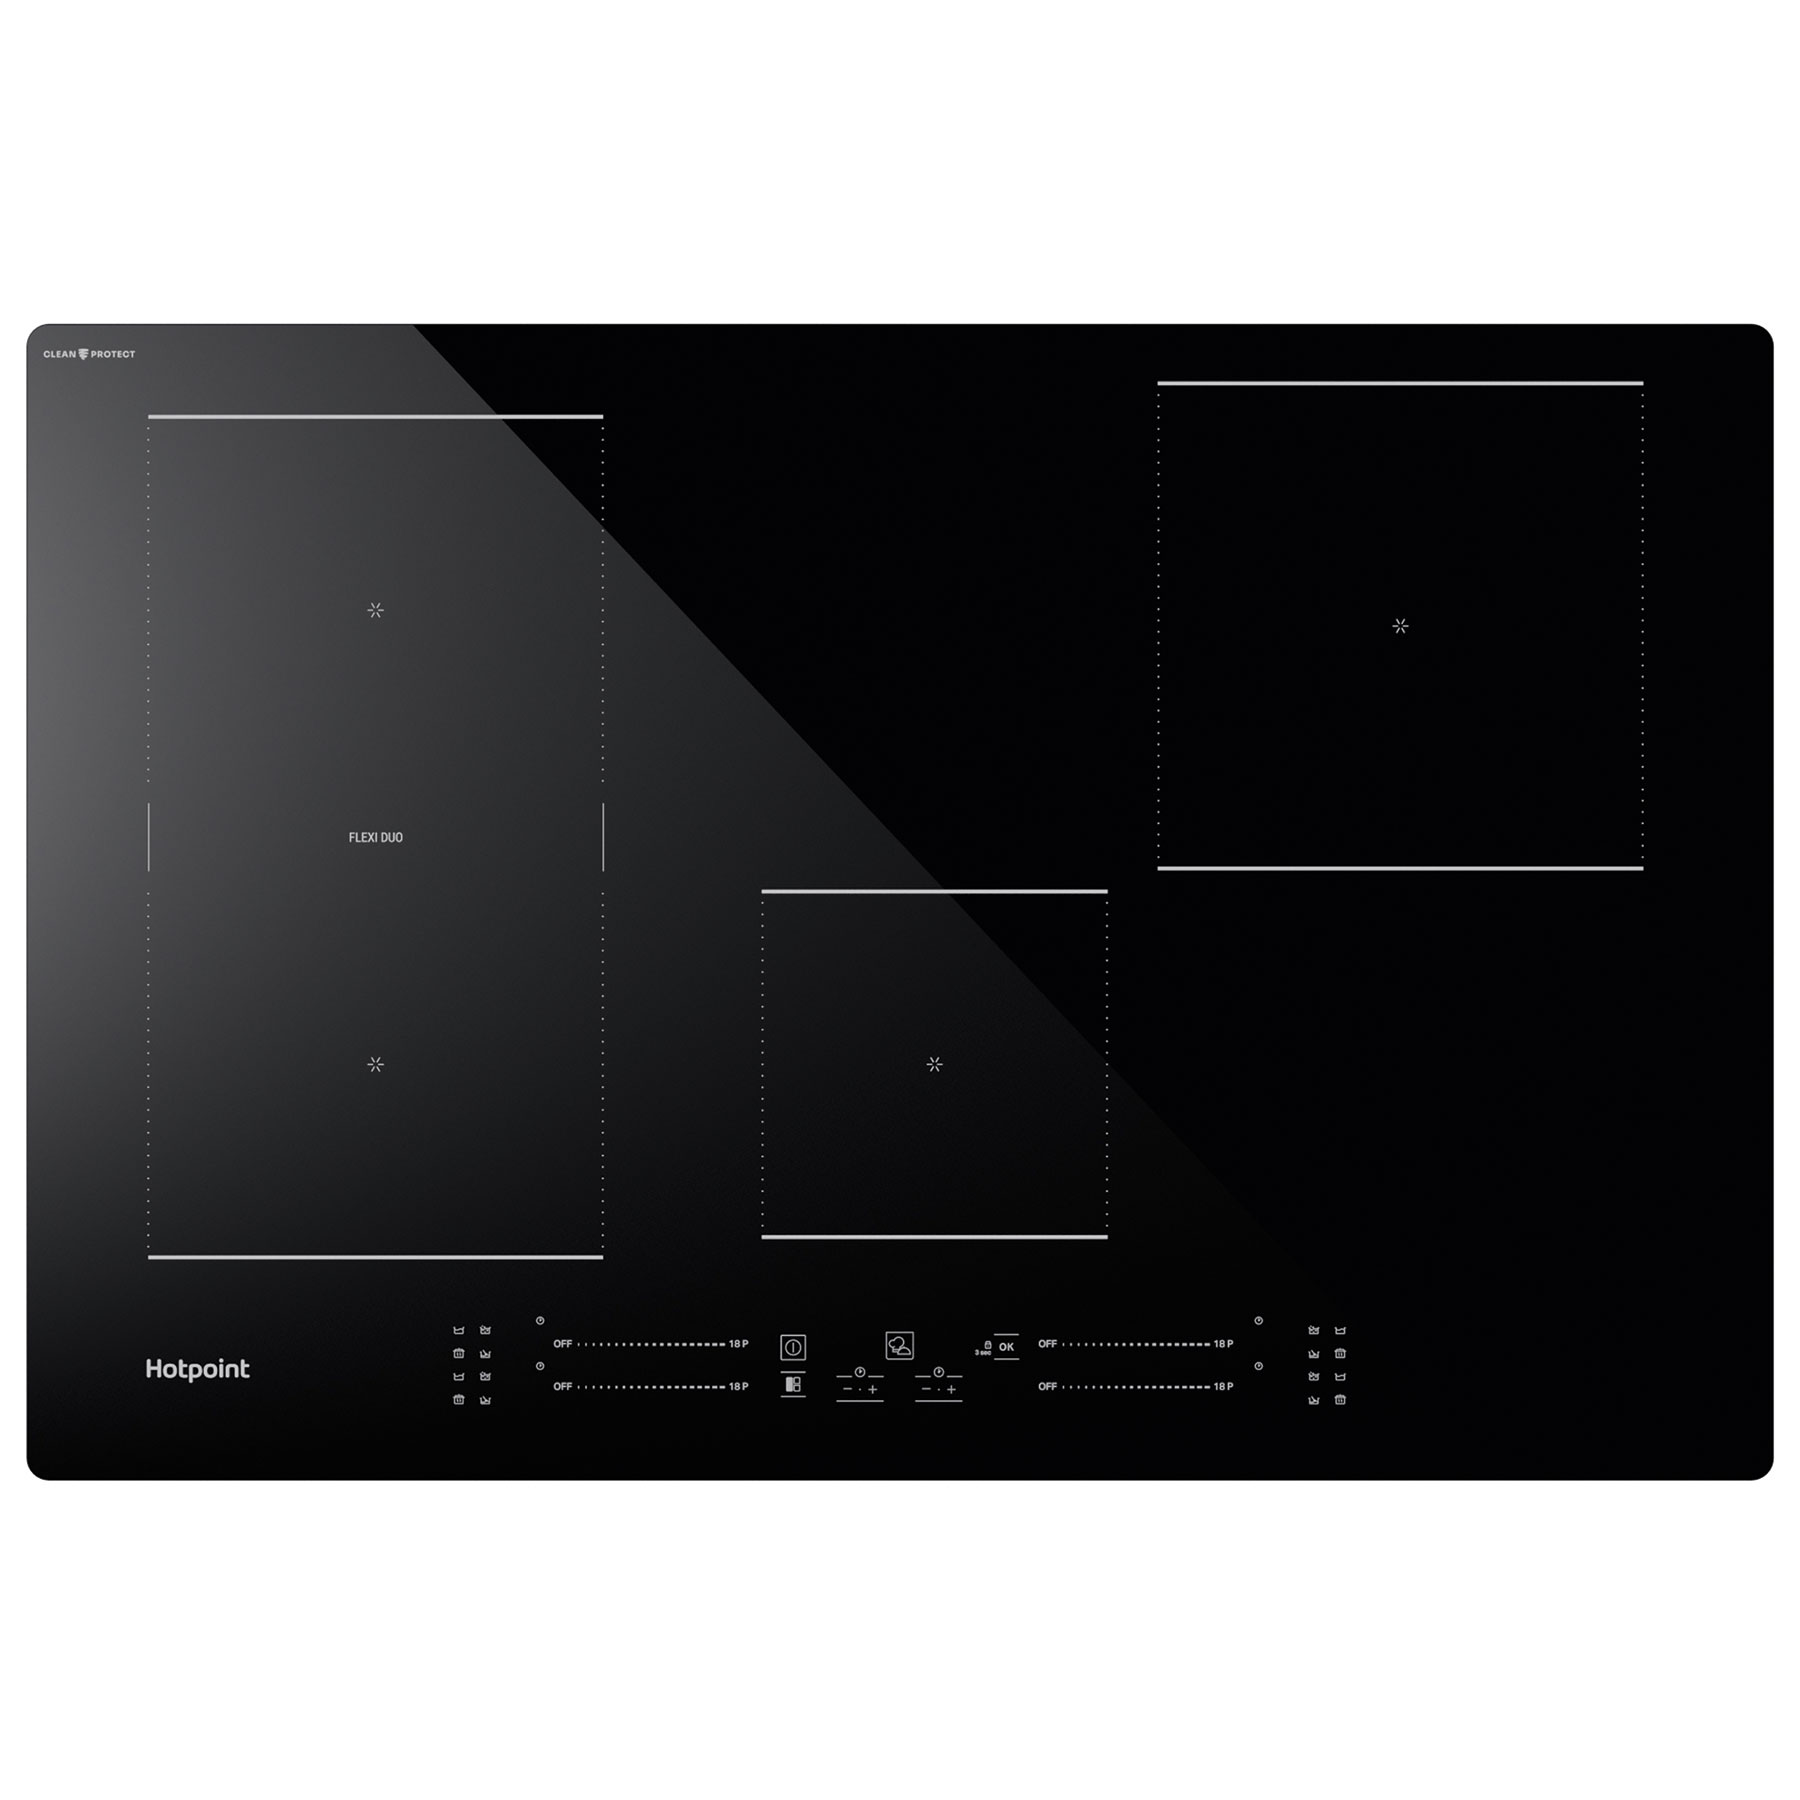 Image of Hotpoint TS6477CCPNE 77cm Induction Hob in Black 4 Zone Flexi Duo Zone